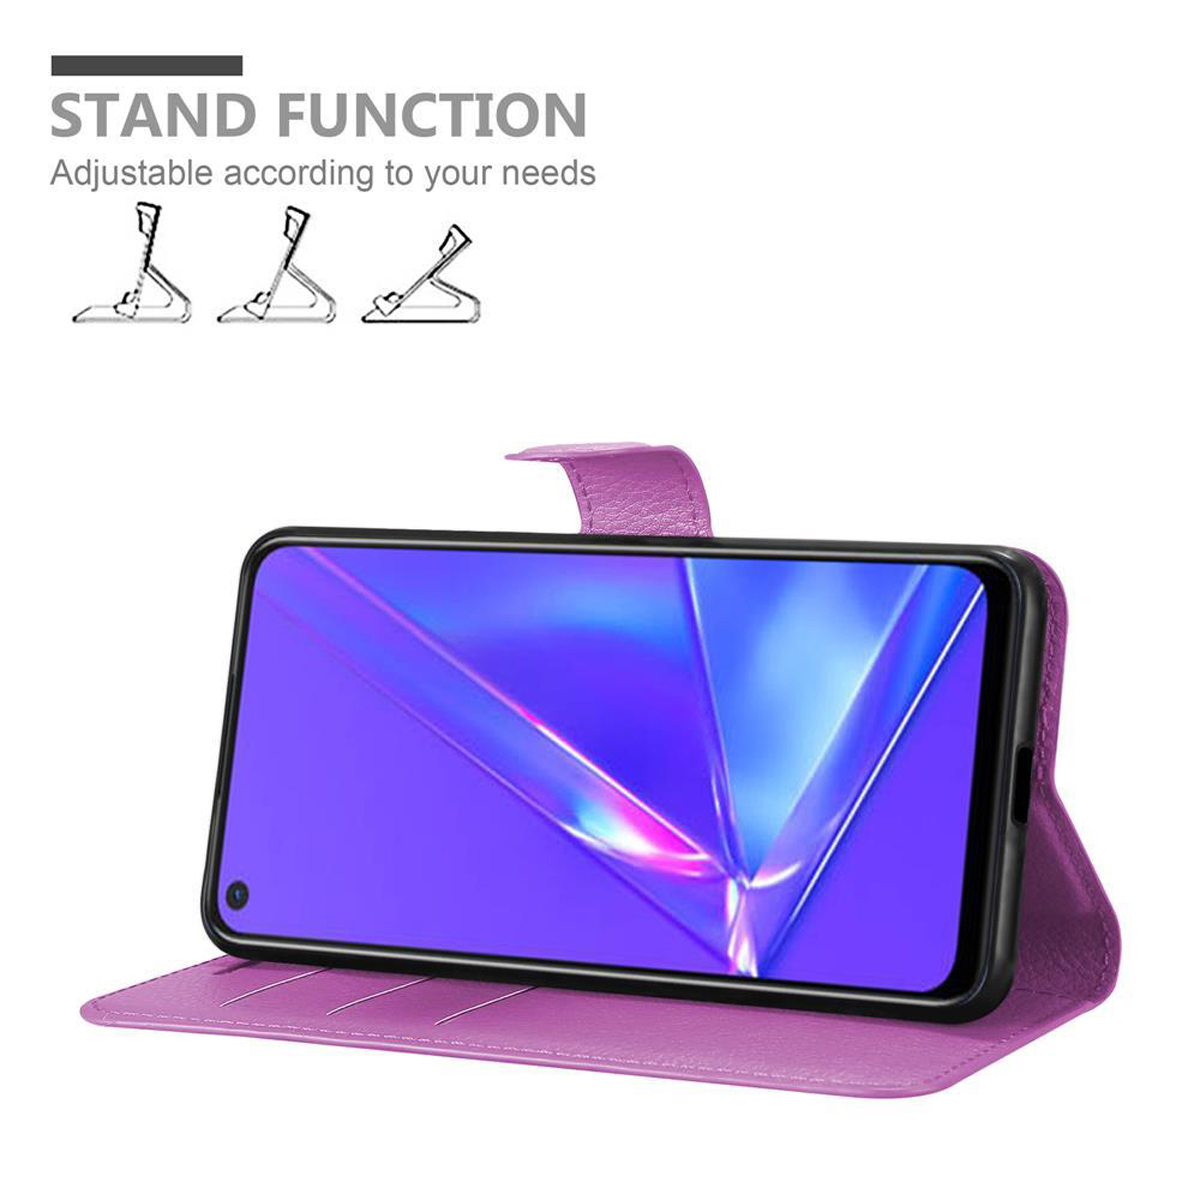 Book CADORABO MANGAN VIOLETT Standfunktion, Hülle Bookcover, Oppo, A72,